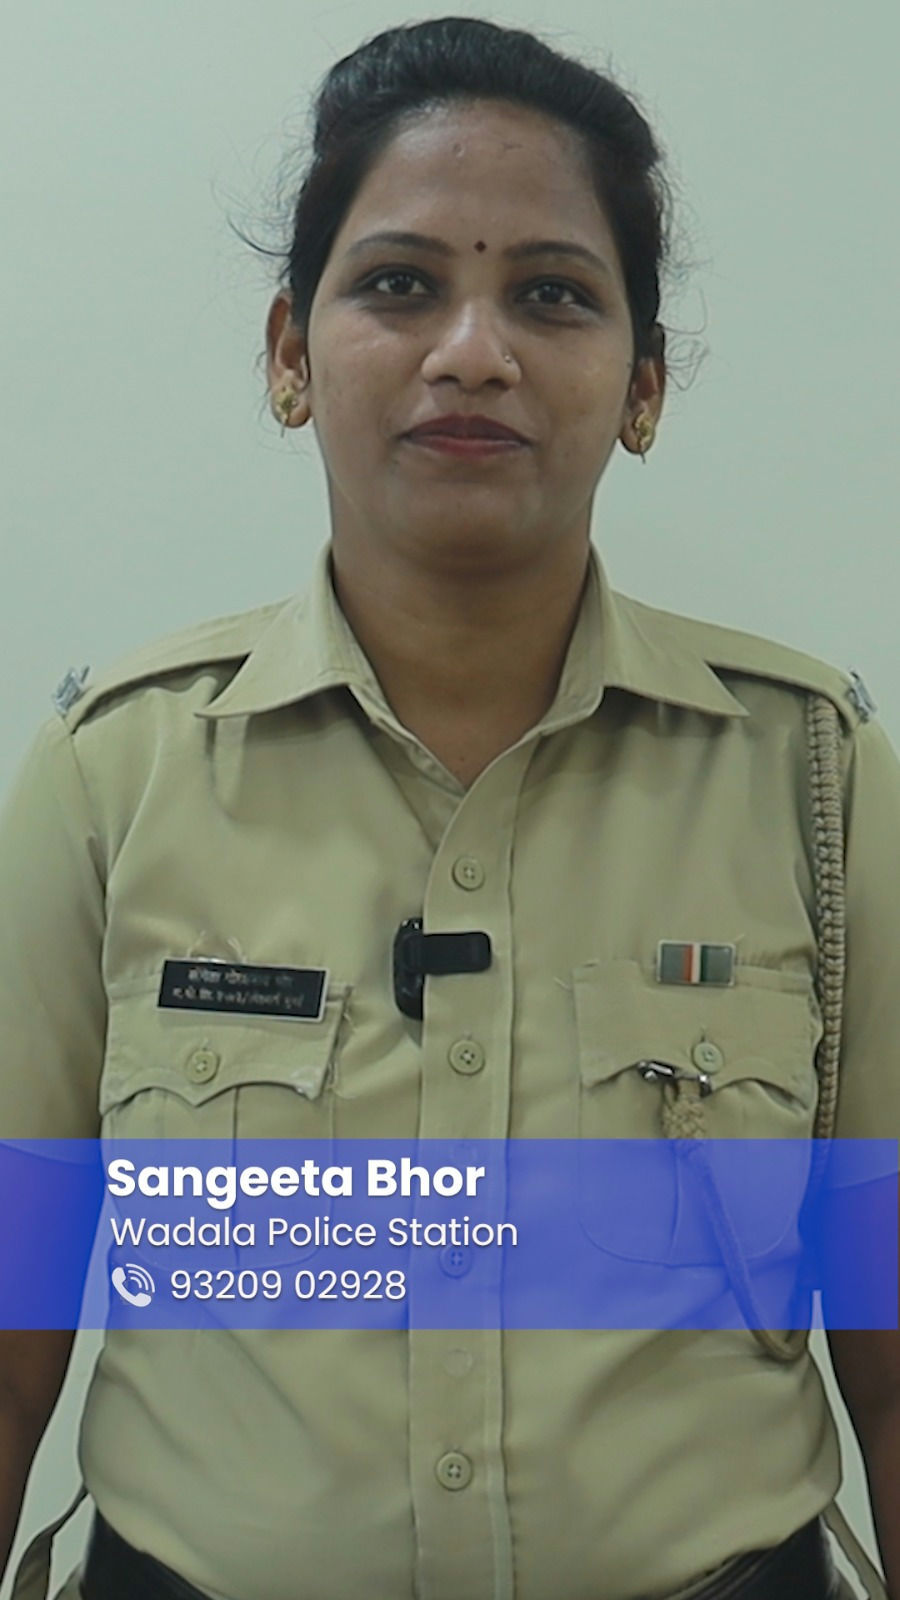 Meet our Khakitali Sakhee - Sangeeta. 

Whenever you feel unsafe, your friend is a call away. Save her contact number right away.